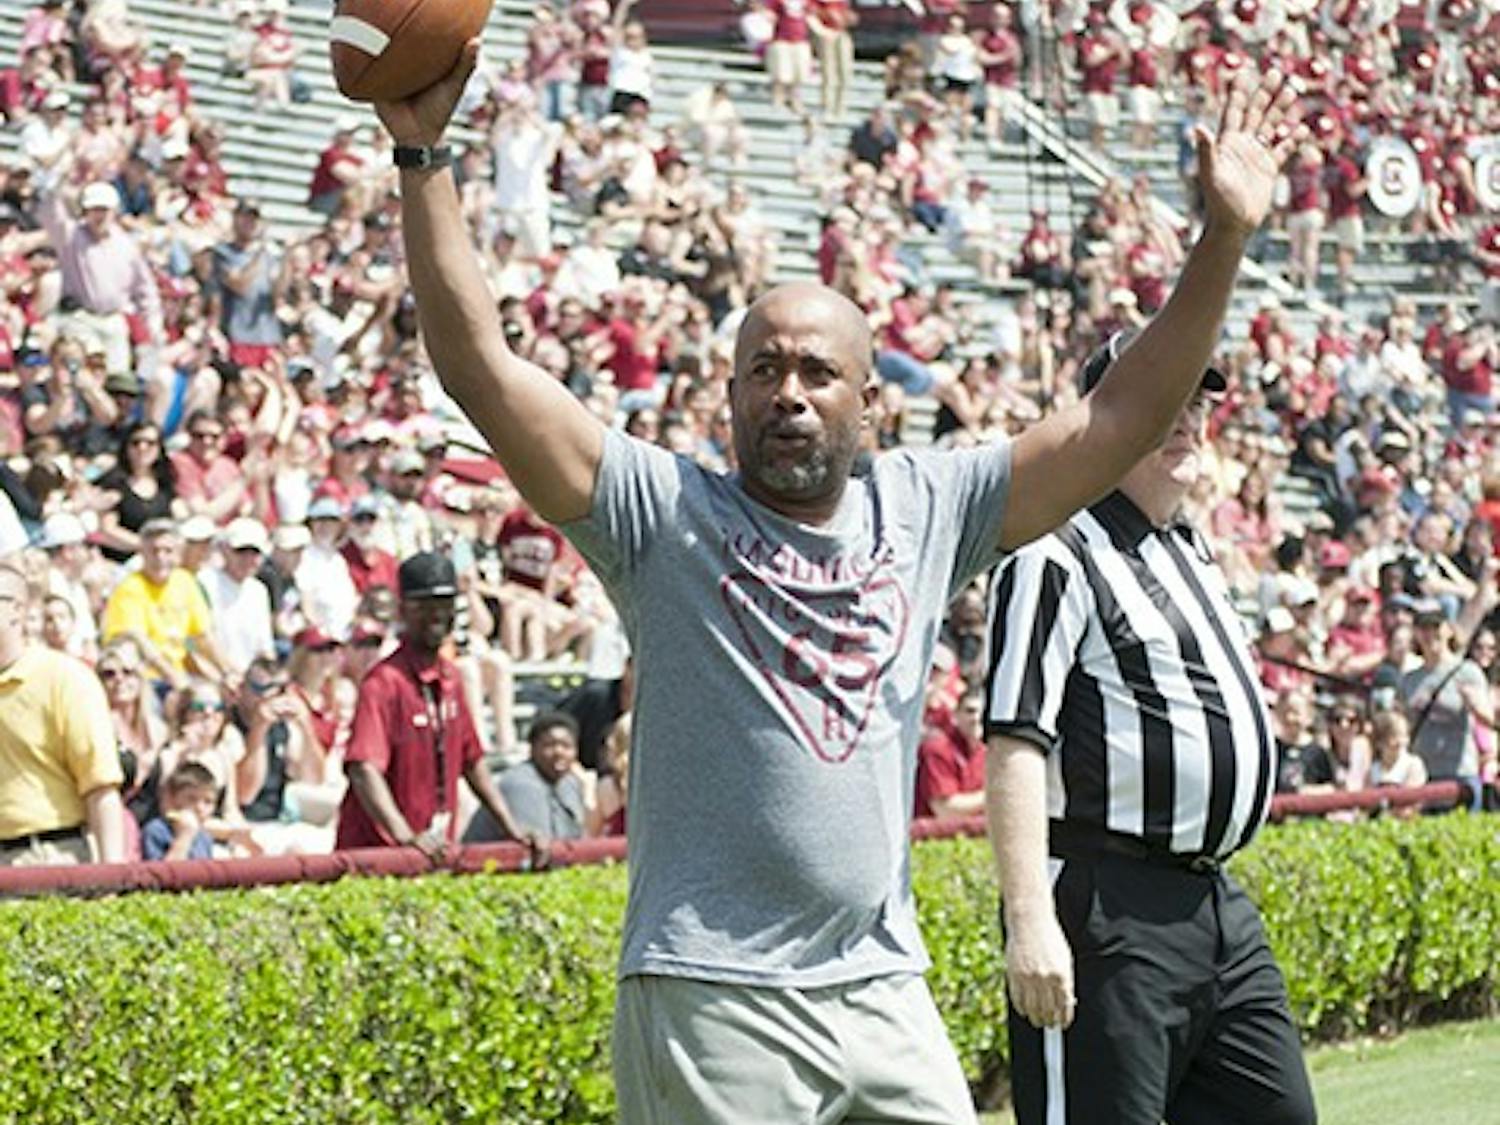 Darius Rucker at the Gamecock football team's spring game in 2015. Rucker will play at the Colonial Life Arena on April 24 in celebration of the Gamecocks women's basketball team earning their second national championship win in program history.